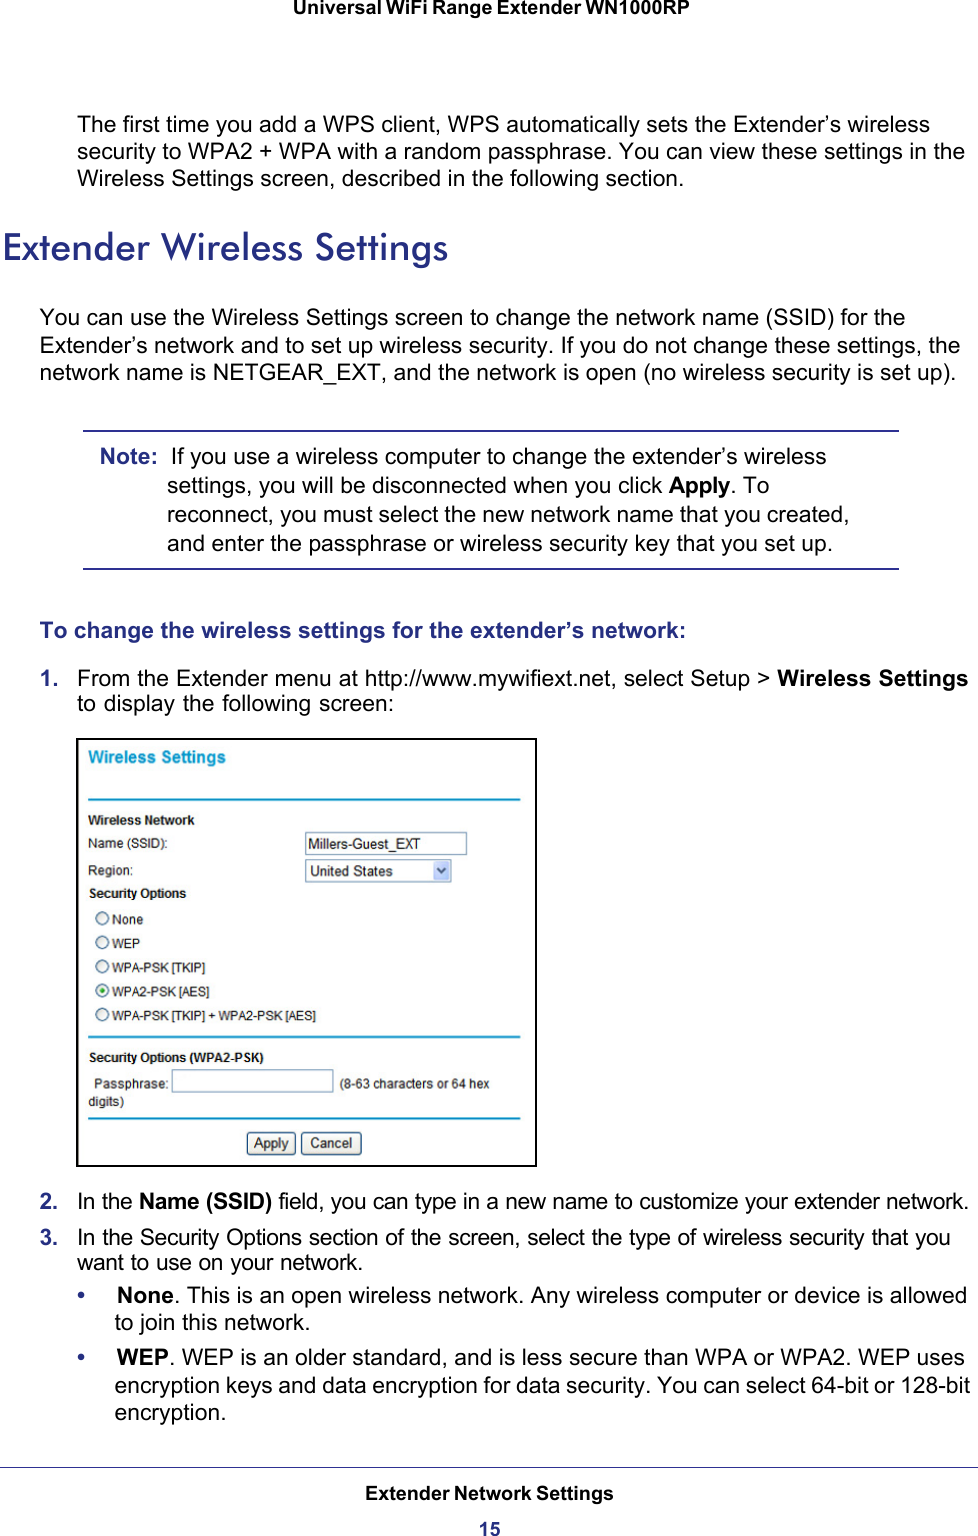 Extender Network Settings15 Universal WiFi Range Extender WN1000RPThe first time you add a WPS client, WPS automatically sets the Extender’s wireless security to WPA2 + WPA with a random passphrase. You can view these settings in the Wireless Settings screen, described in the following section.Extender Wireless SettingsYou can use the Wireless Settings screen to change the network name (SSID) for the Extender’s network and to set up wireless security. If you do not change these settings, the network name is NETGEAR_EXT, and the network is open (no wireless security is set up).Note:  If you use a wireless computer to change the extender’s wireless settings, you will be disconnected when you click Apply. To reconnect, you must select the new network name that you created, and enter the passphrase or wireless security key that you set up. To change the wireless settings for the extender’s network:1.  From the Extender menu at http://www.mywifiext.net, select Setup &gt; Wireless Settings to display the following screen:2.  In the Name (SSID) field, you can type in a new name to customize your extender network. 3.  In the Security Options section of the screen, select the type of wireless security that you want to use on your network.•     None. This is an open wireless network. Any wireless computer or device is allowed to join this network.•     WEP. WEP is an older standard, and is less secure than WPA or WPA2. WEP uses encryption keys and data encryption for data security. You can select 64-bit or 128-bit encryption.